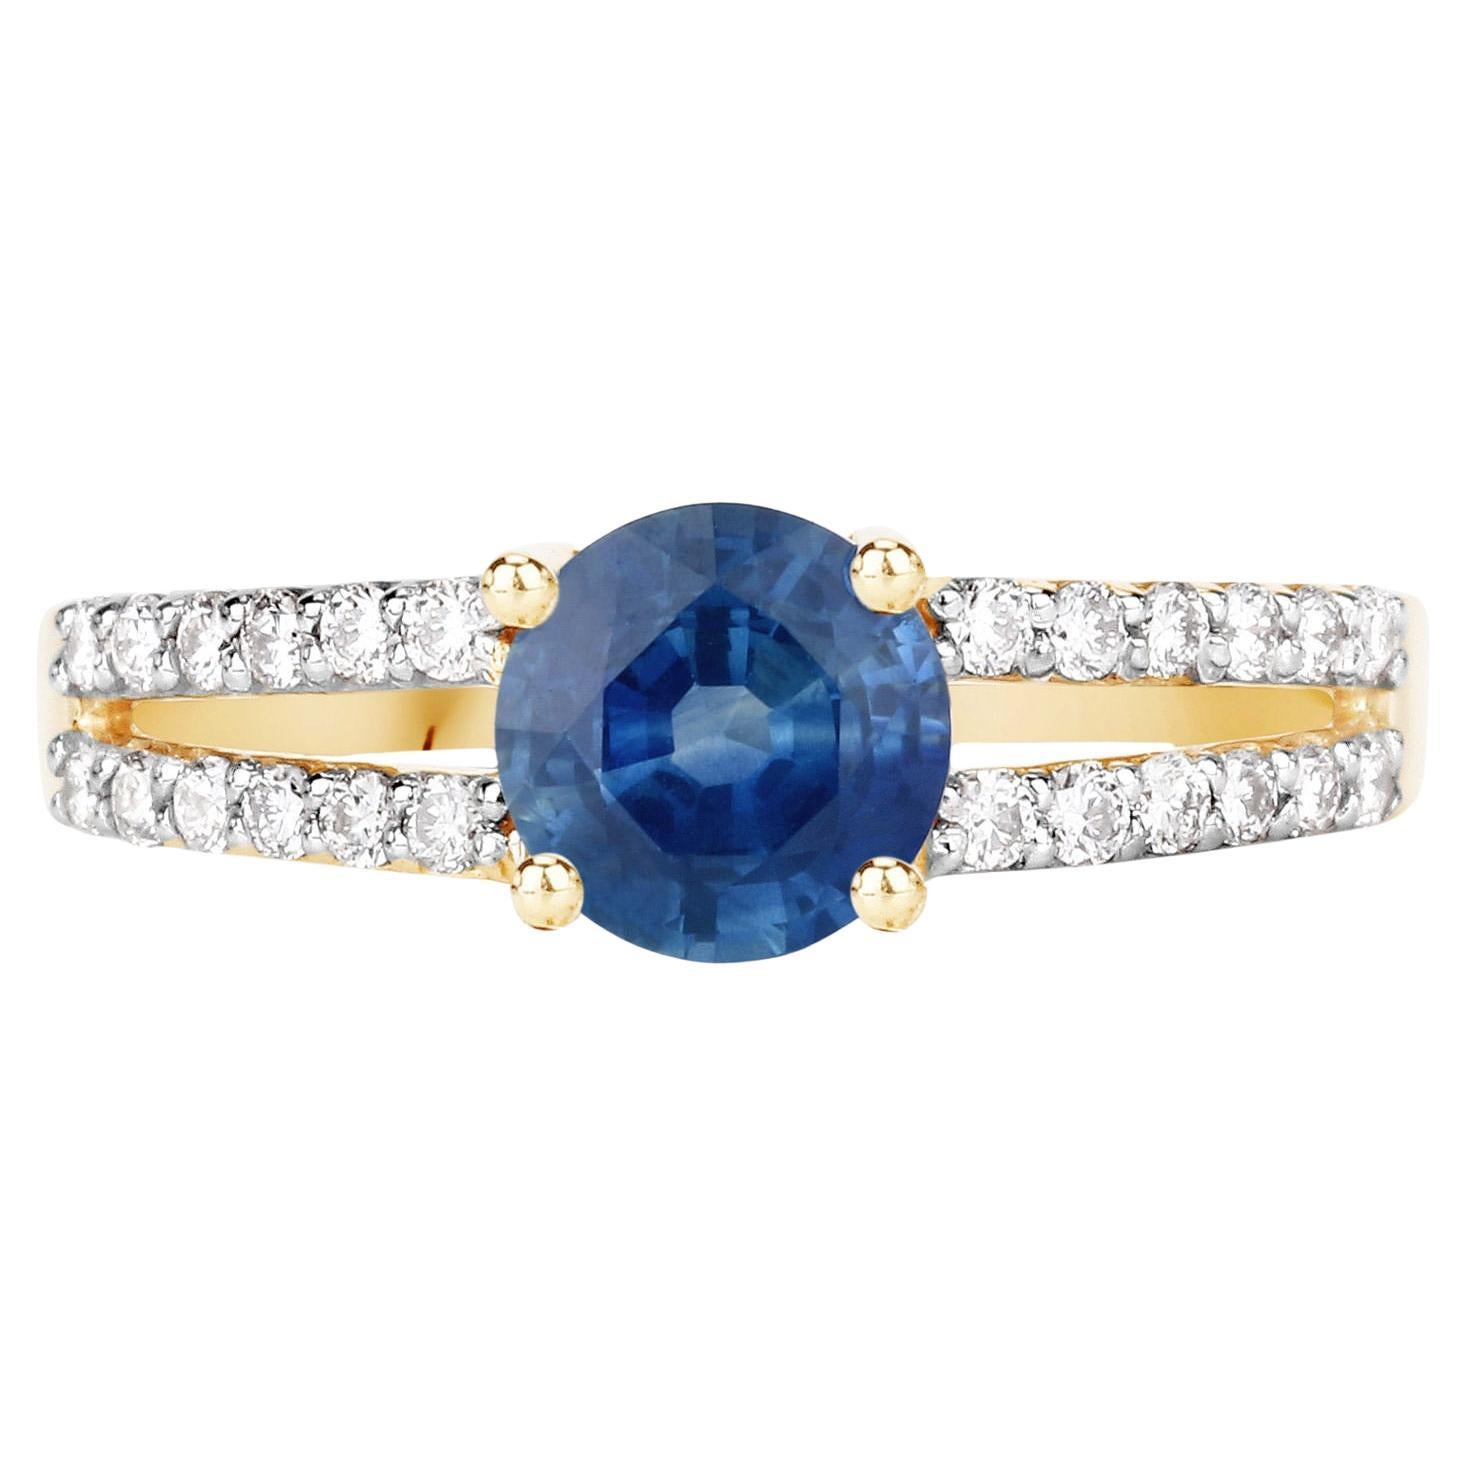 Blue Sapphire Ring With Diamonds 1.29 Carats 14K Yellow Gold